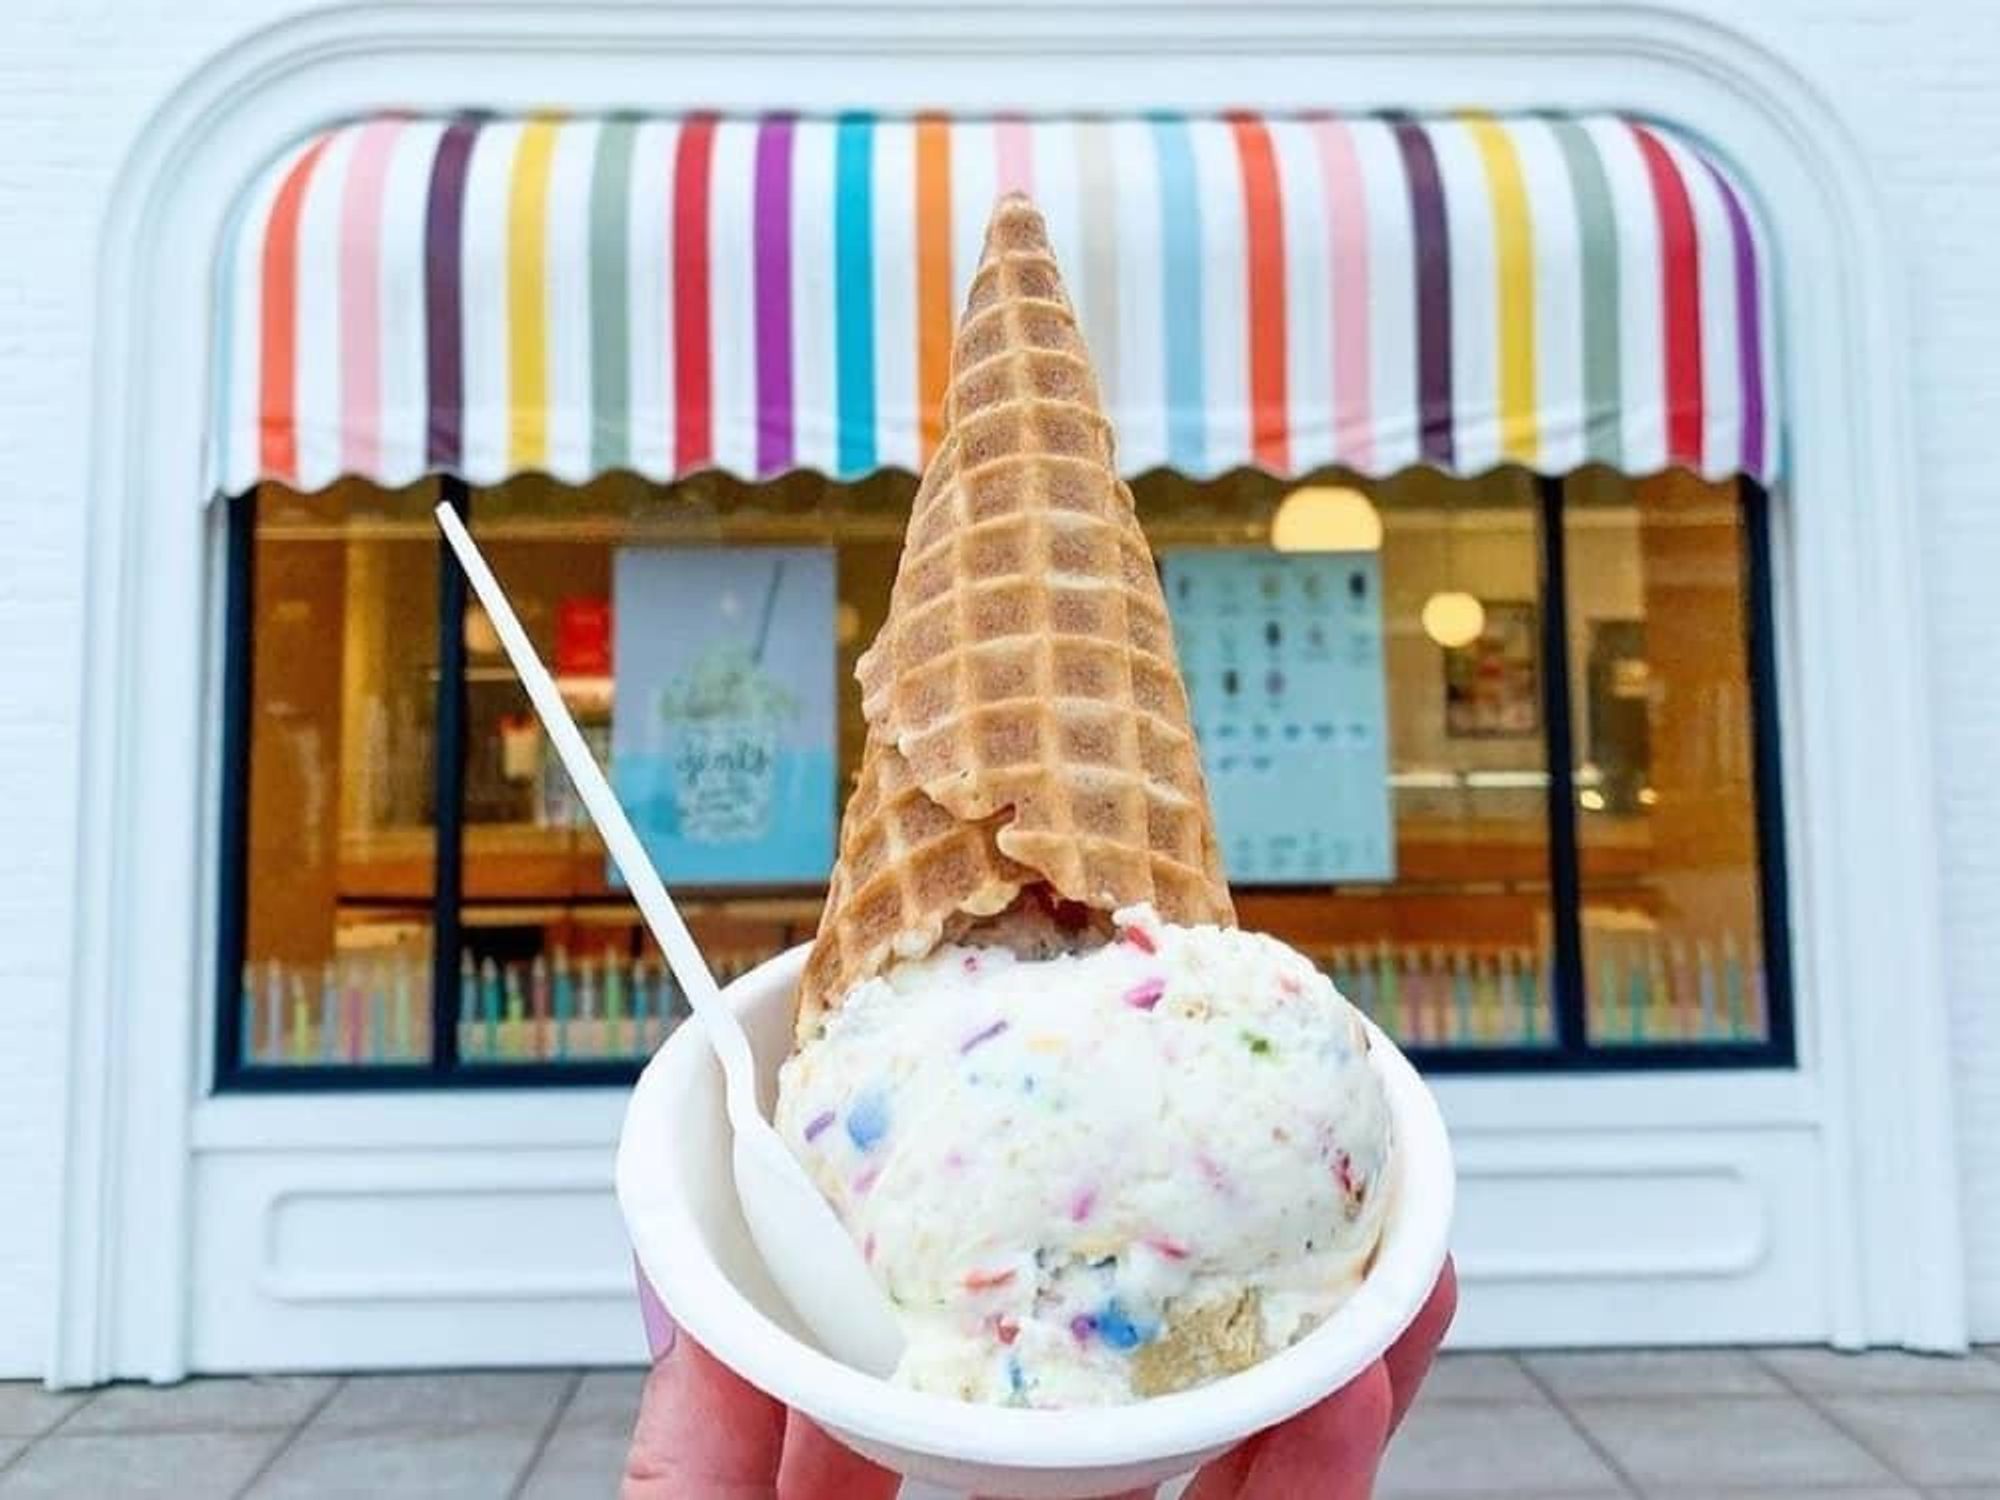 An insider's guide to the best ice cream shops in Houston